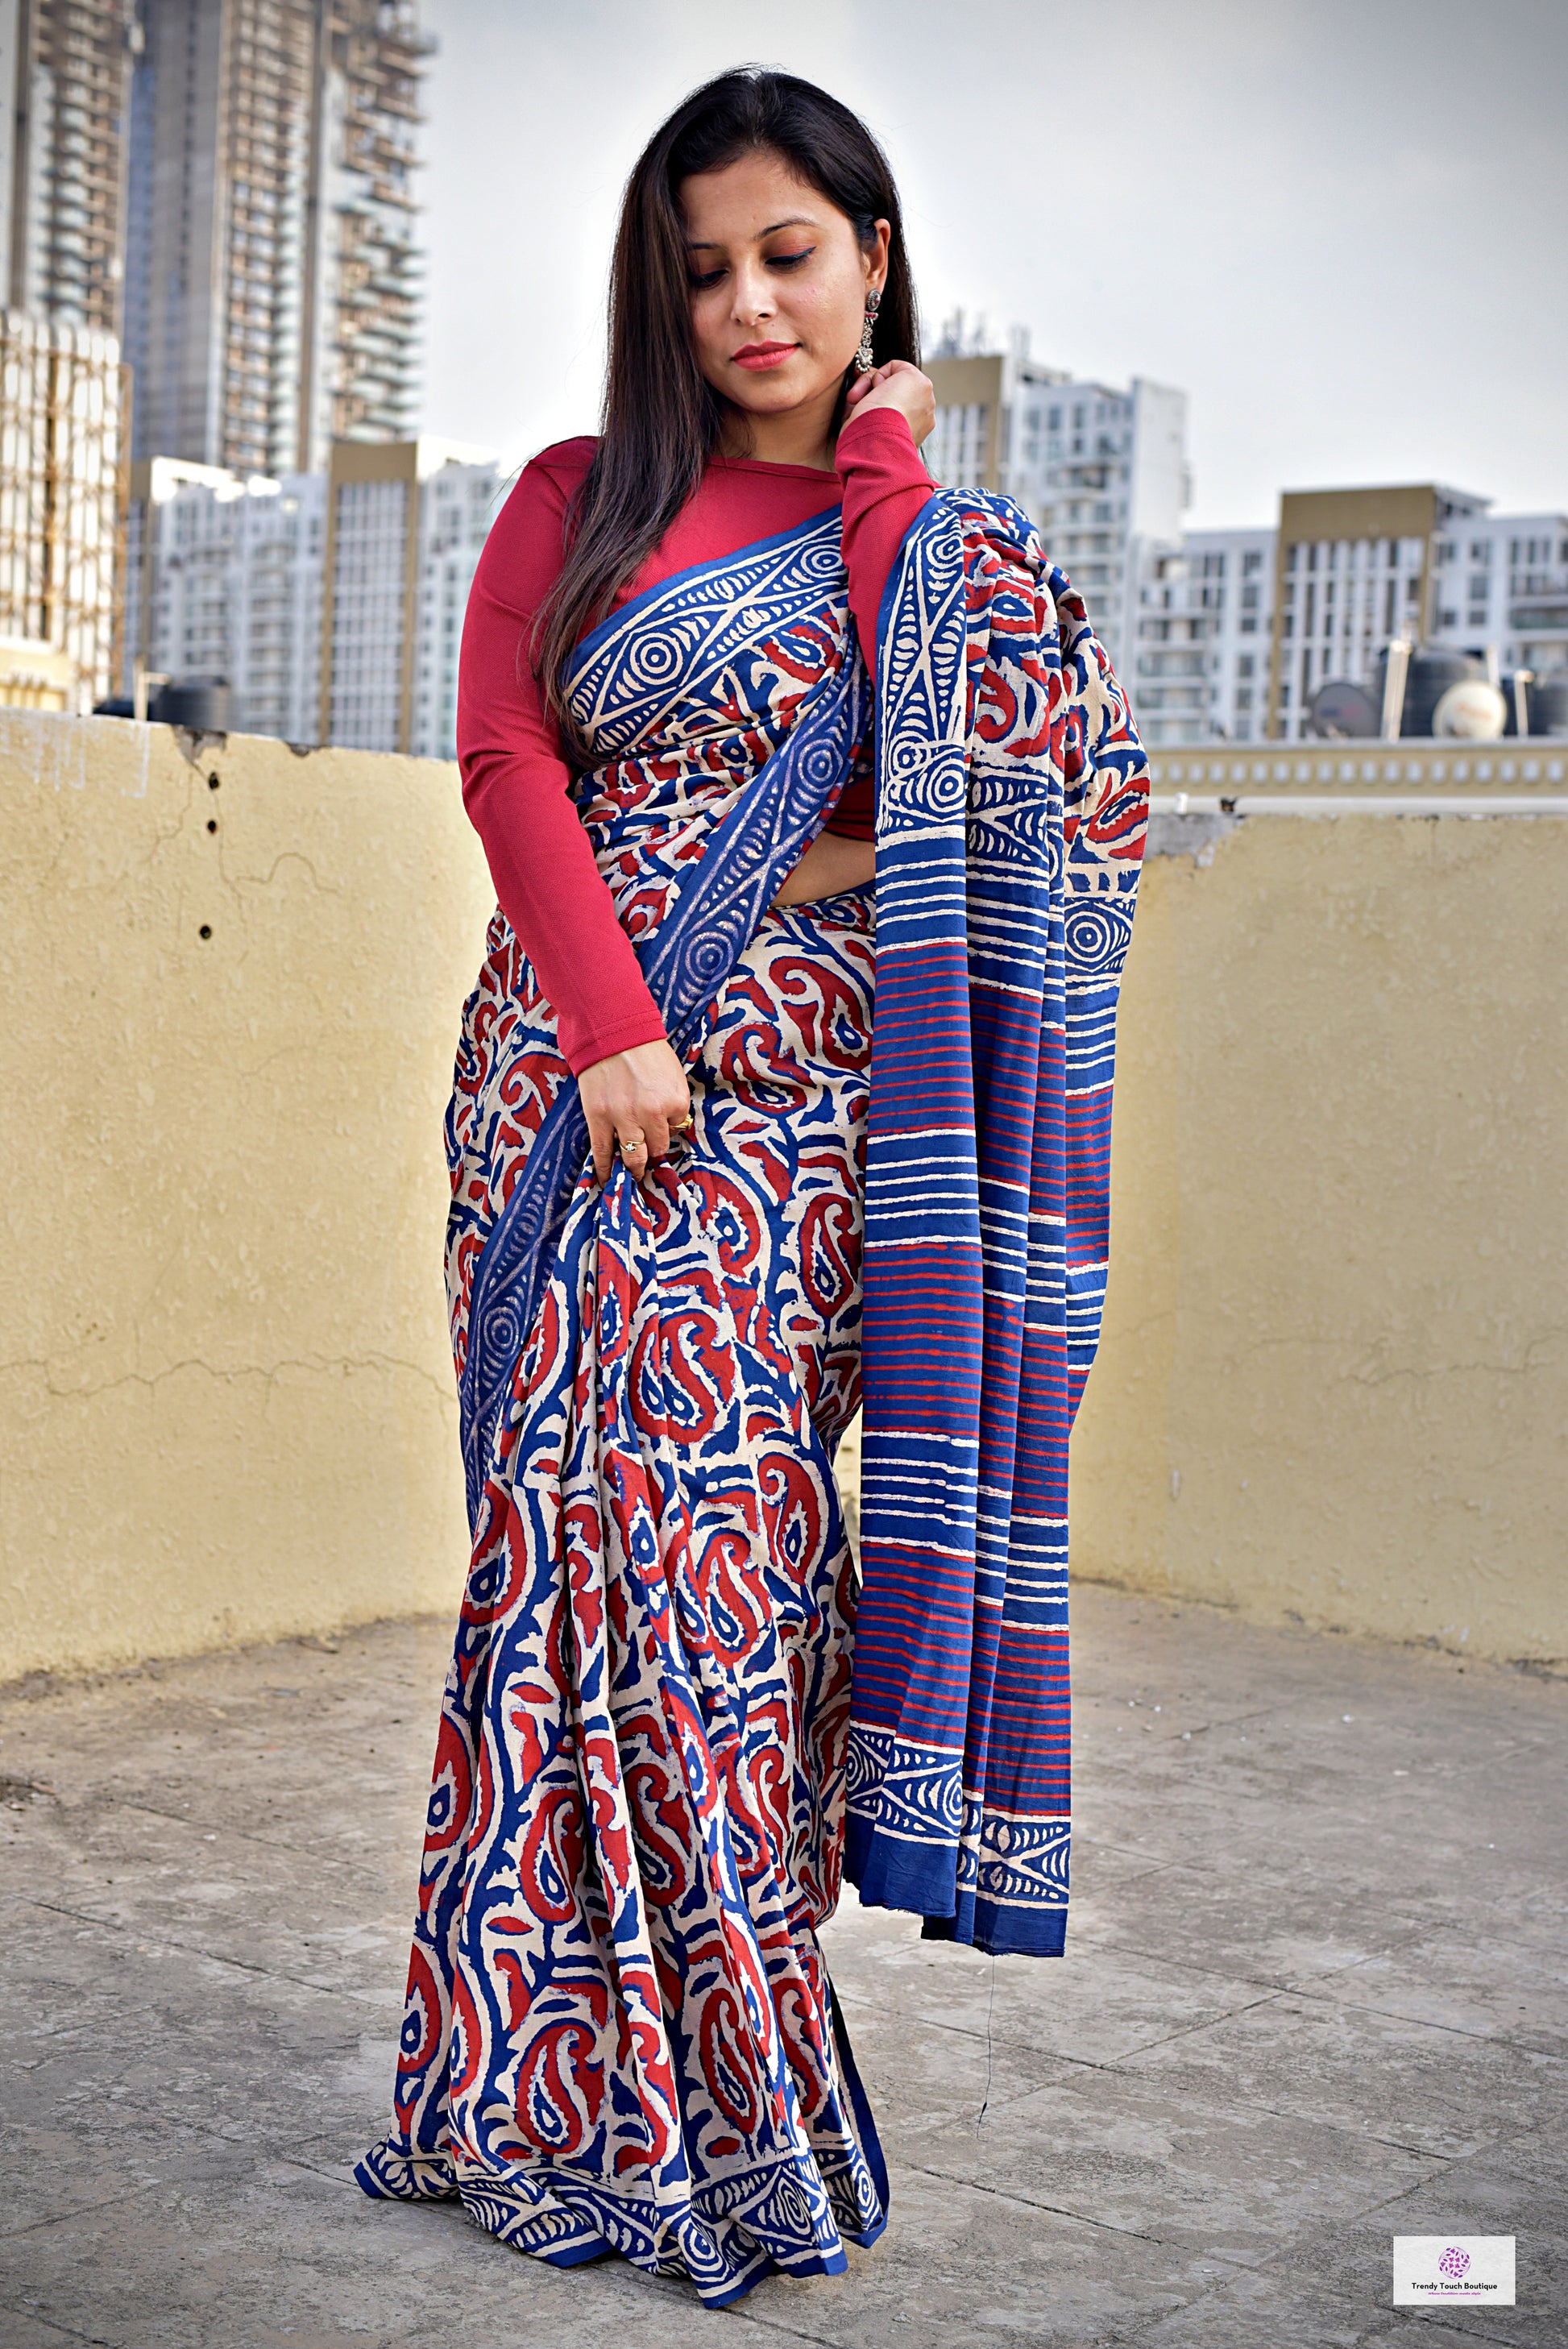 handblock print best summer fabric mulcotton saree office wear and lightweight summer sarees best price red and blue for teachers and corporate women